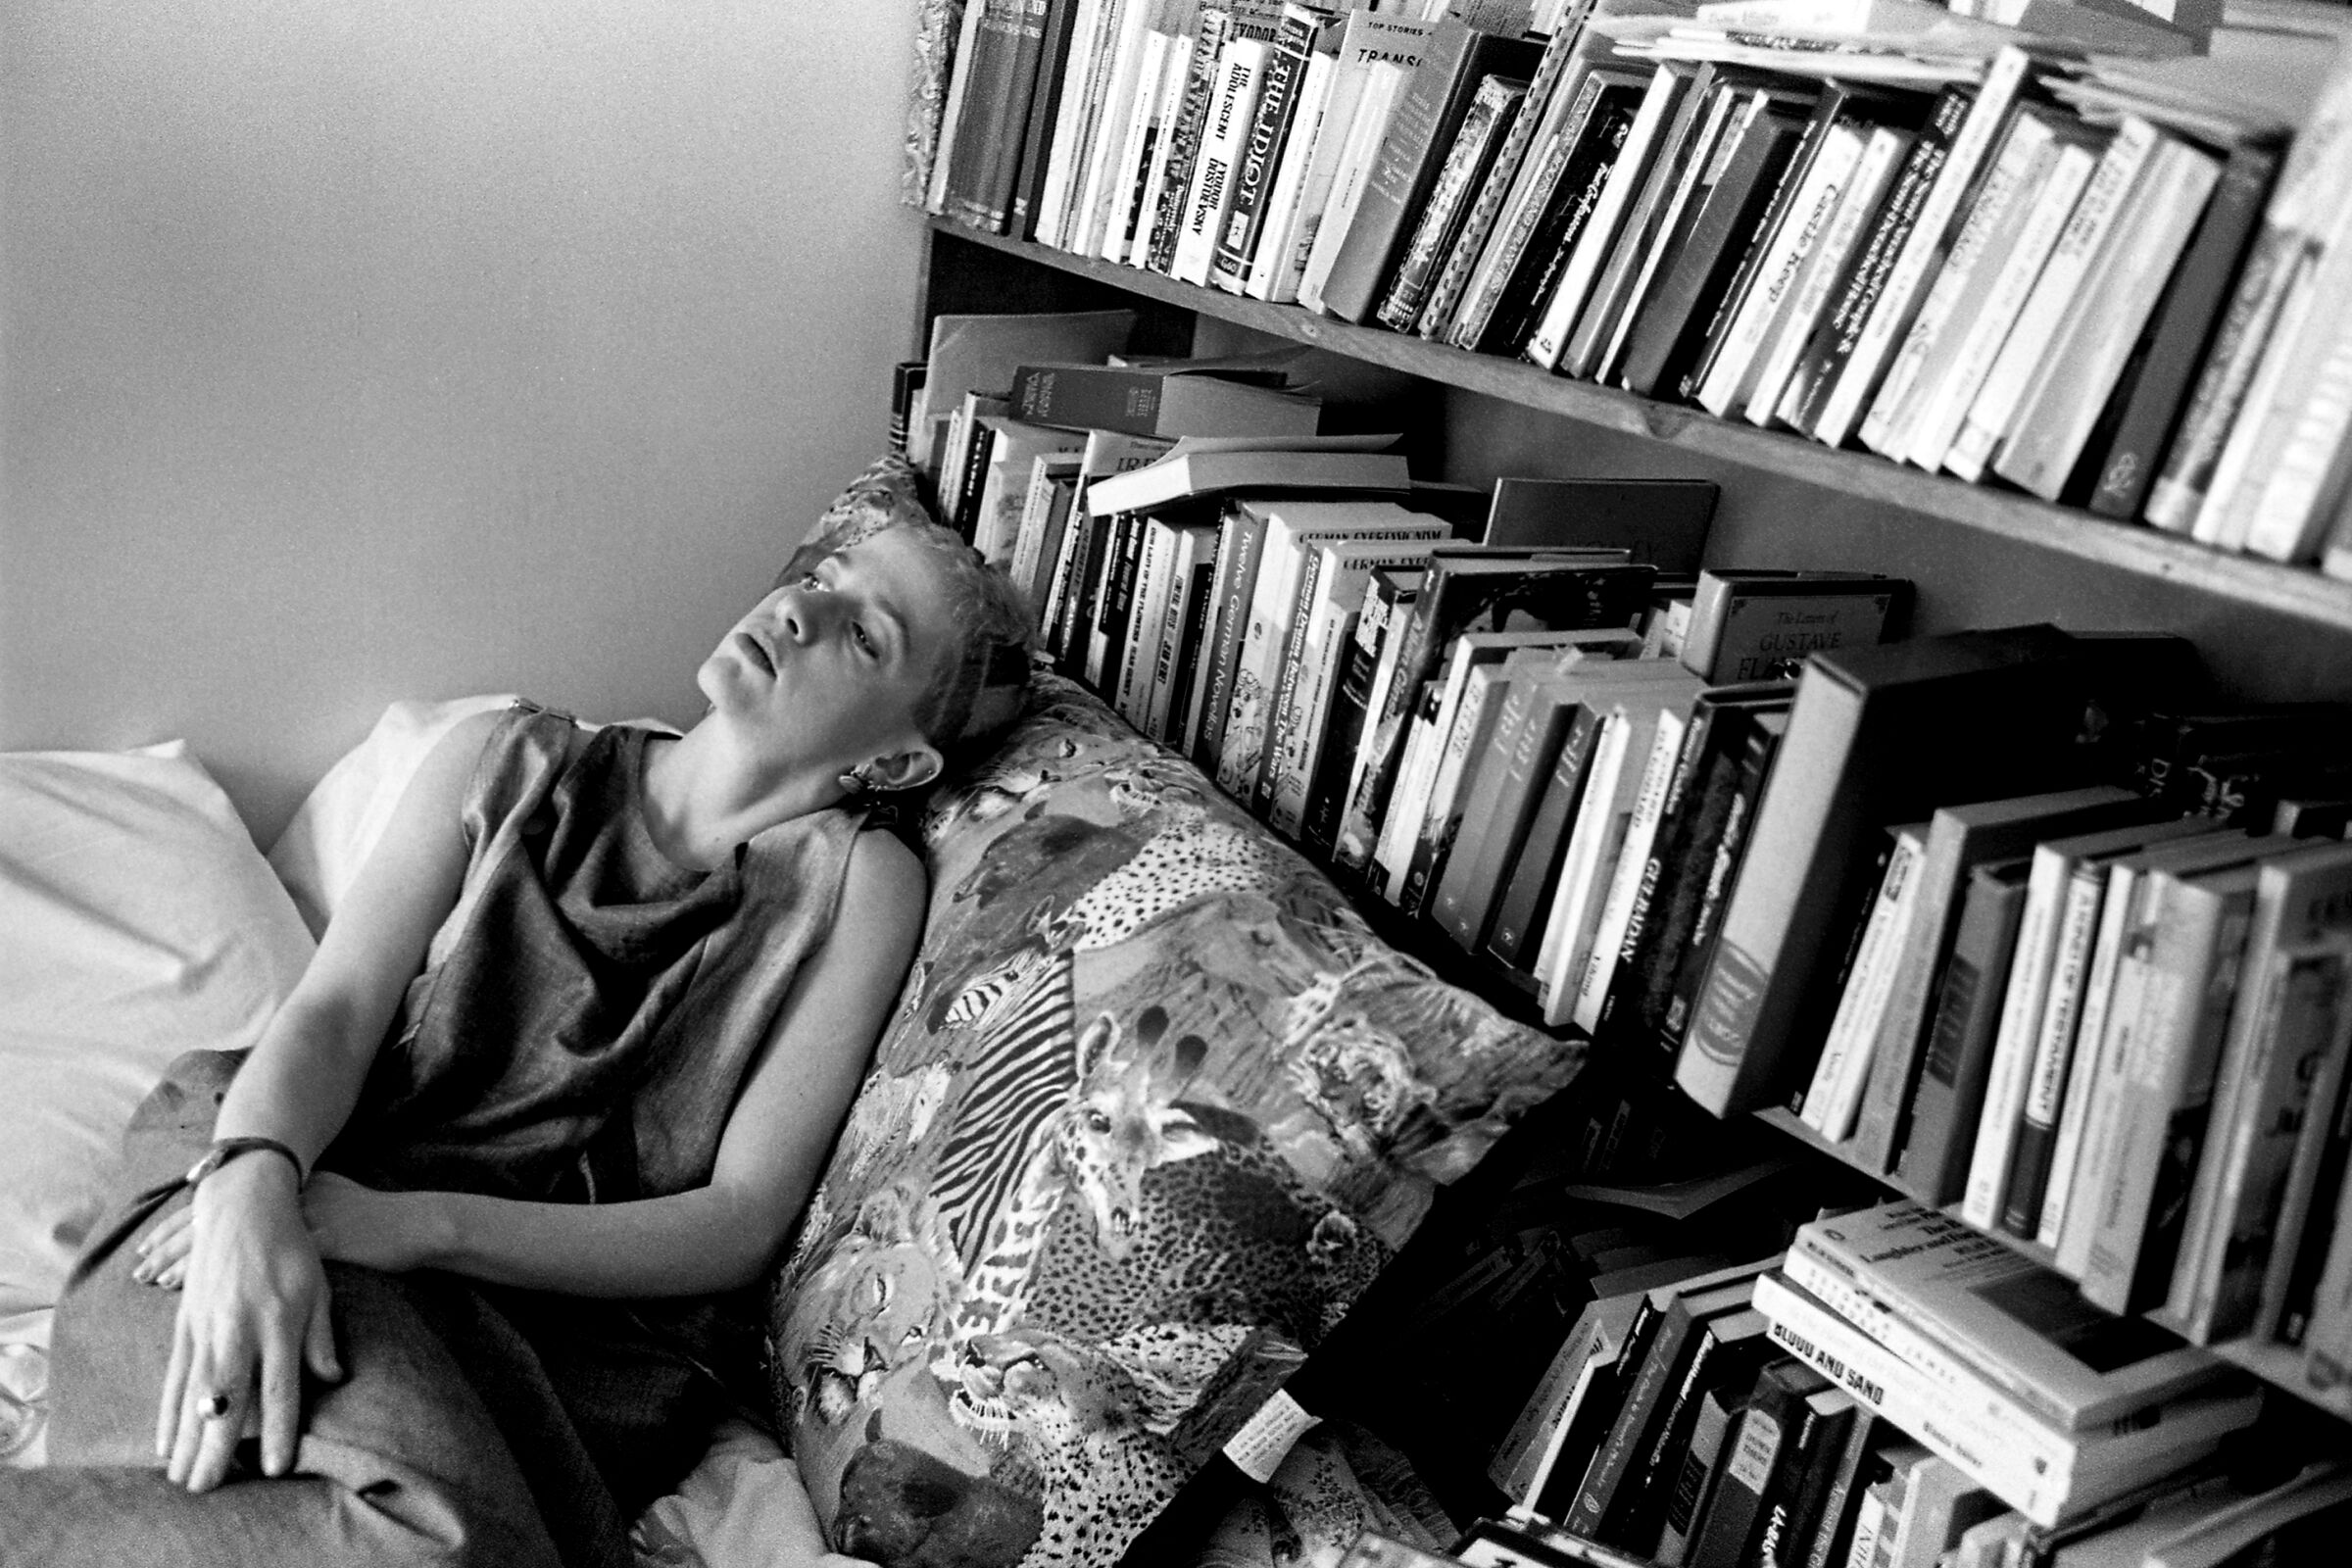 Kathy Acker, lying next to her library in her Lower East Side loft in 1983.